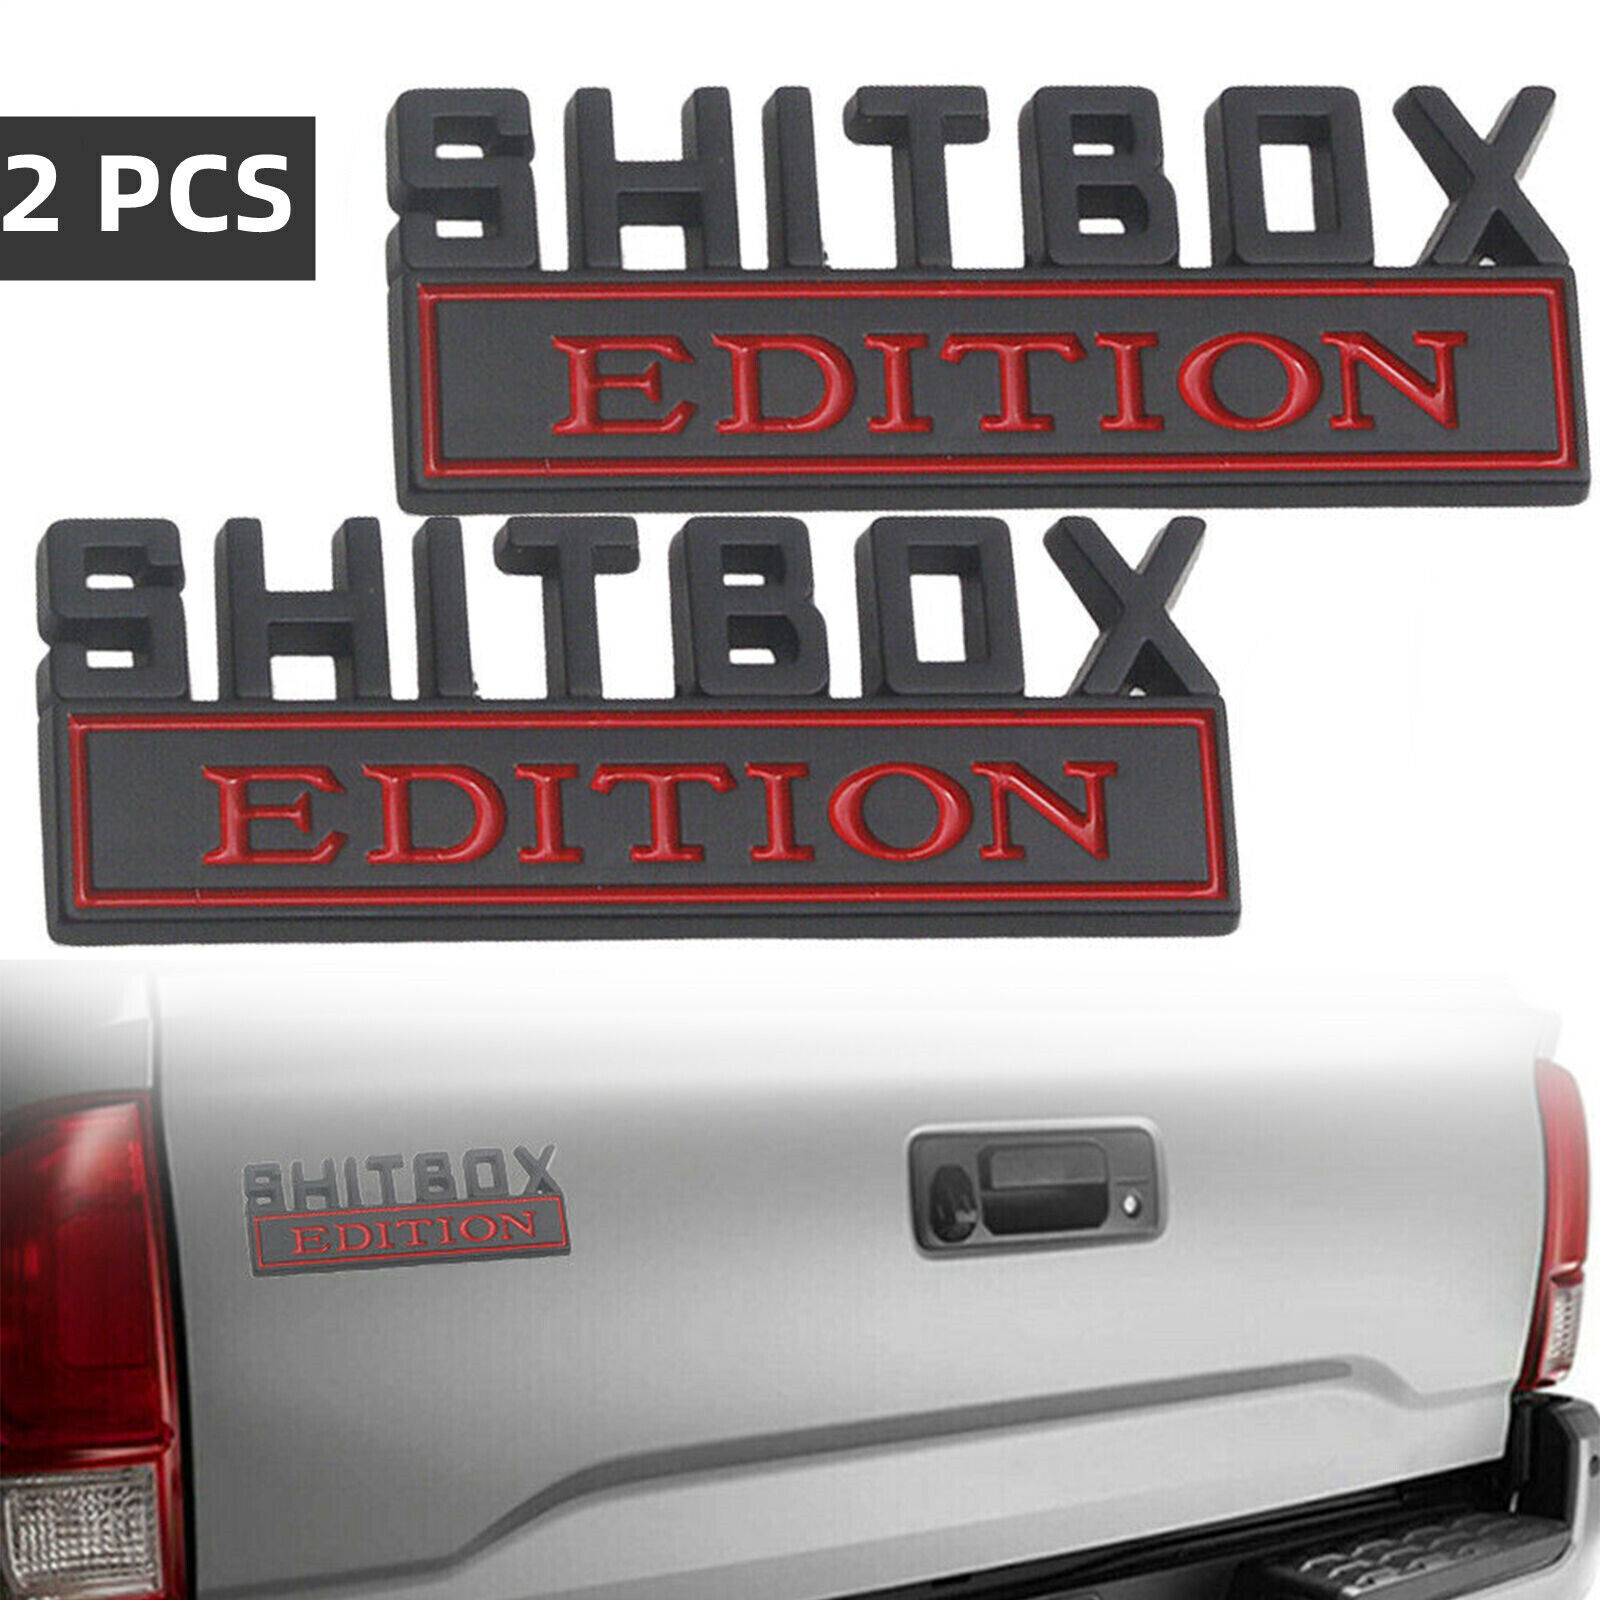 SHITBOX EDITION  2pcs  Emblem Decal Badge Stickers for GM GMC Chevy Car Truck 3D